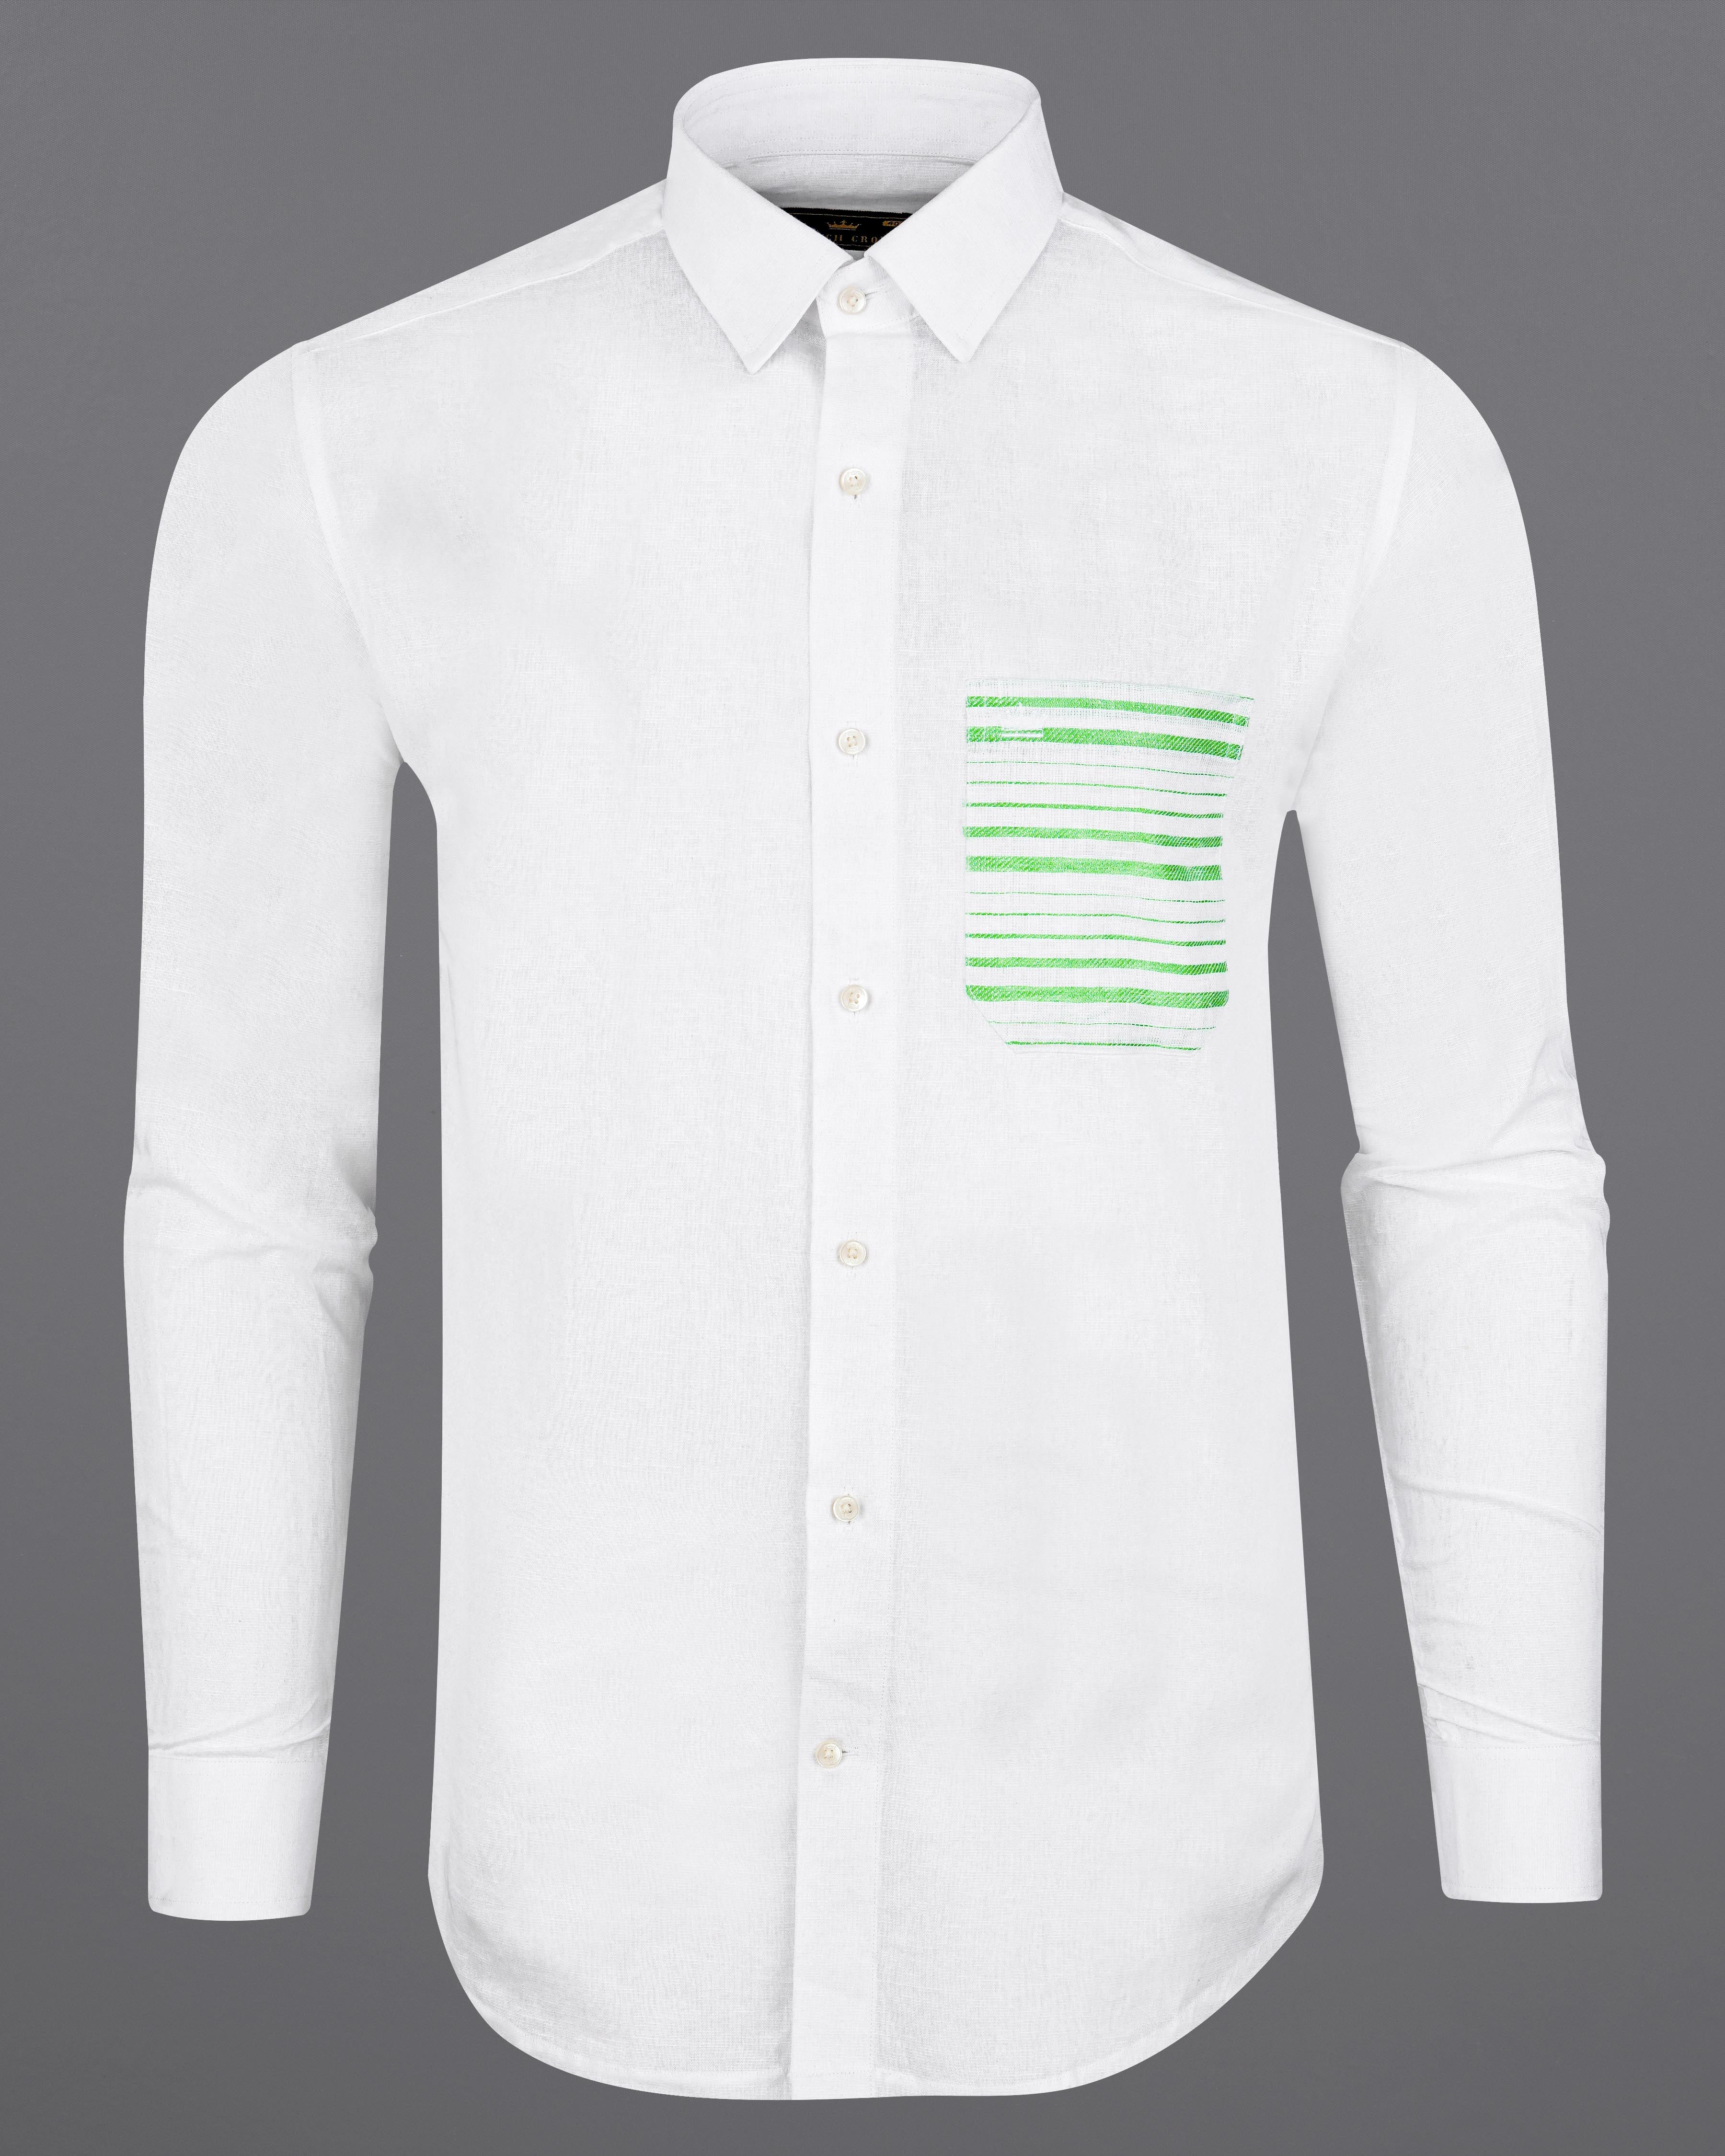 Bright White with Green Patch Pocket Luxurious Linen Designer Shirt 8422-38, 8422-H-38, 8422-39,8422-H-39, 8422-40, 8422-H-40, 8422-42, 8422-H-42, 8422-44, 8422-H-44, 8422-46, 8422-H-46, 8422-48, 8422-H-48, 8422-50, 8422-H-50, 8422-52, 8422-H-52